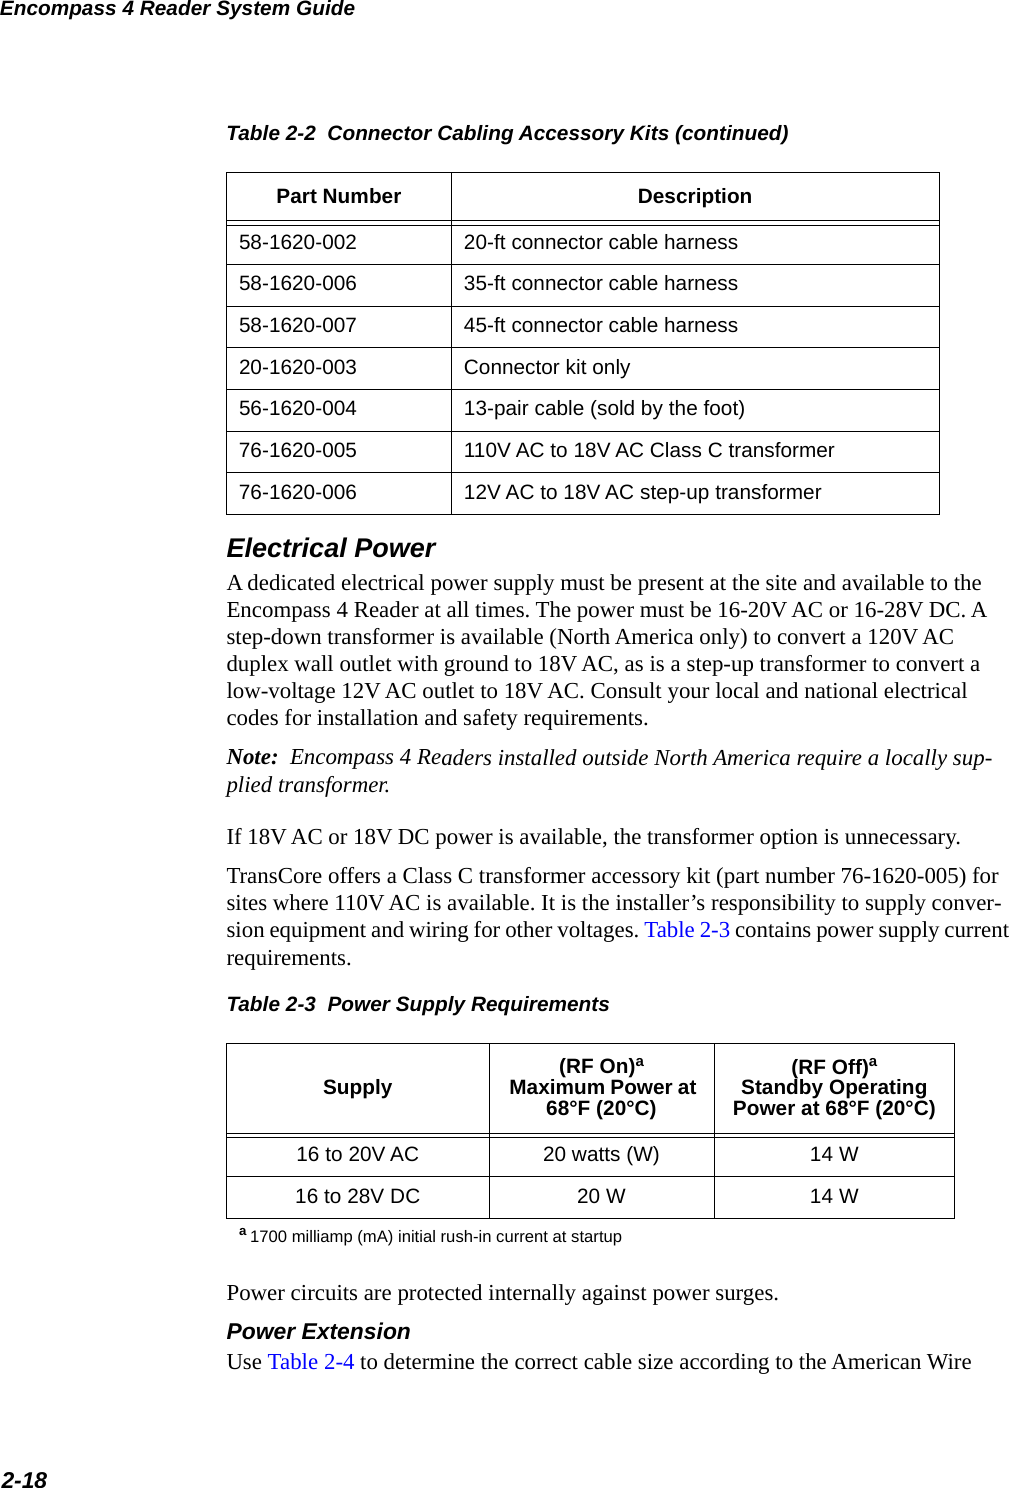 Encompass 4 Reader System Guide2-18Electrical PowerA dedicated electrical power supply must be present at the site and available to the Encompass 4 Reader at all times. The power must be 16-20V AC or 16-28V DC. A step-down transformer is available (North America only) to convert a 120V AC duplex wall outlet with ground to 18V AC, as is a step-up transformer to convert a low-voltage 12V AC outlet to 18V AC. Consult your local and national electrical codes for installation and safety requirements.Note:  Encompass 4 Readers installed outside North America require a locally sup-plied transformer. If 18V AC or 18V DC power is available, the transformer option is unnecessary.TransCore offers a Class C transformer accessory kit (part number 76-1620-005) for sites where 110V AC is available. It is the installer’s responsibility to supply conver-sion equipment and wiring for other voltages. Table 2-3 contains power supply current requirements.Table 2-3  Power Supply RequirementsSupply (RF On)a Maximum Power at 68°F (20°C)(RF Off)aStandby Operating Power at 68°F (20°C)16 to 20V AC 20 watts (W) 14 W16 to 28V DC 20 W 14 Wa 1700 milliamp (mA) initial rush-in current at startupPower circuits are protected internally against power surges. Power Extension Use Table 2-4 to determine the correct cable size according to the American Wire 58-1620-002 20-ft connector cable harness58-1620-006 35-ft connector cable harness58-1620-007 45-ft connector cable harness20-1620-003 Connector kit only56-1620-004 13-pair cable (sold by the foot)76-1620-005 110V AC to 18V AC Class C transformer76-1620-006 12V AC to 18V AC step-up transformerTable 2-2  Connector Cabling Accessory Kits (continued)Part Number Description